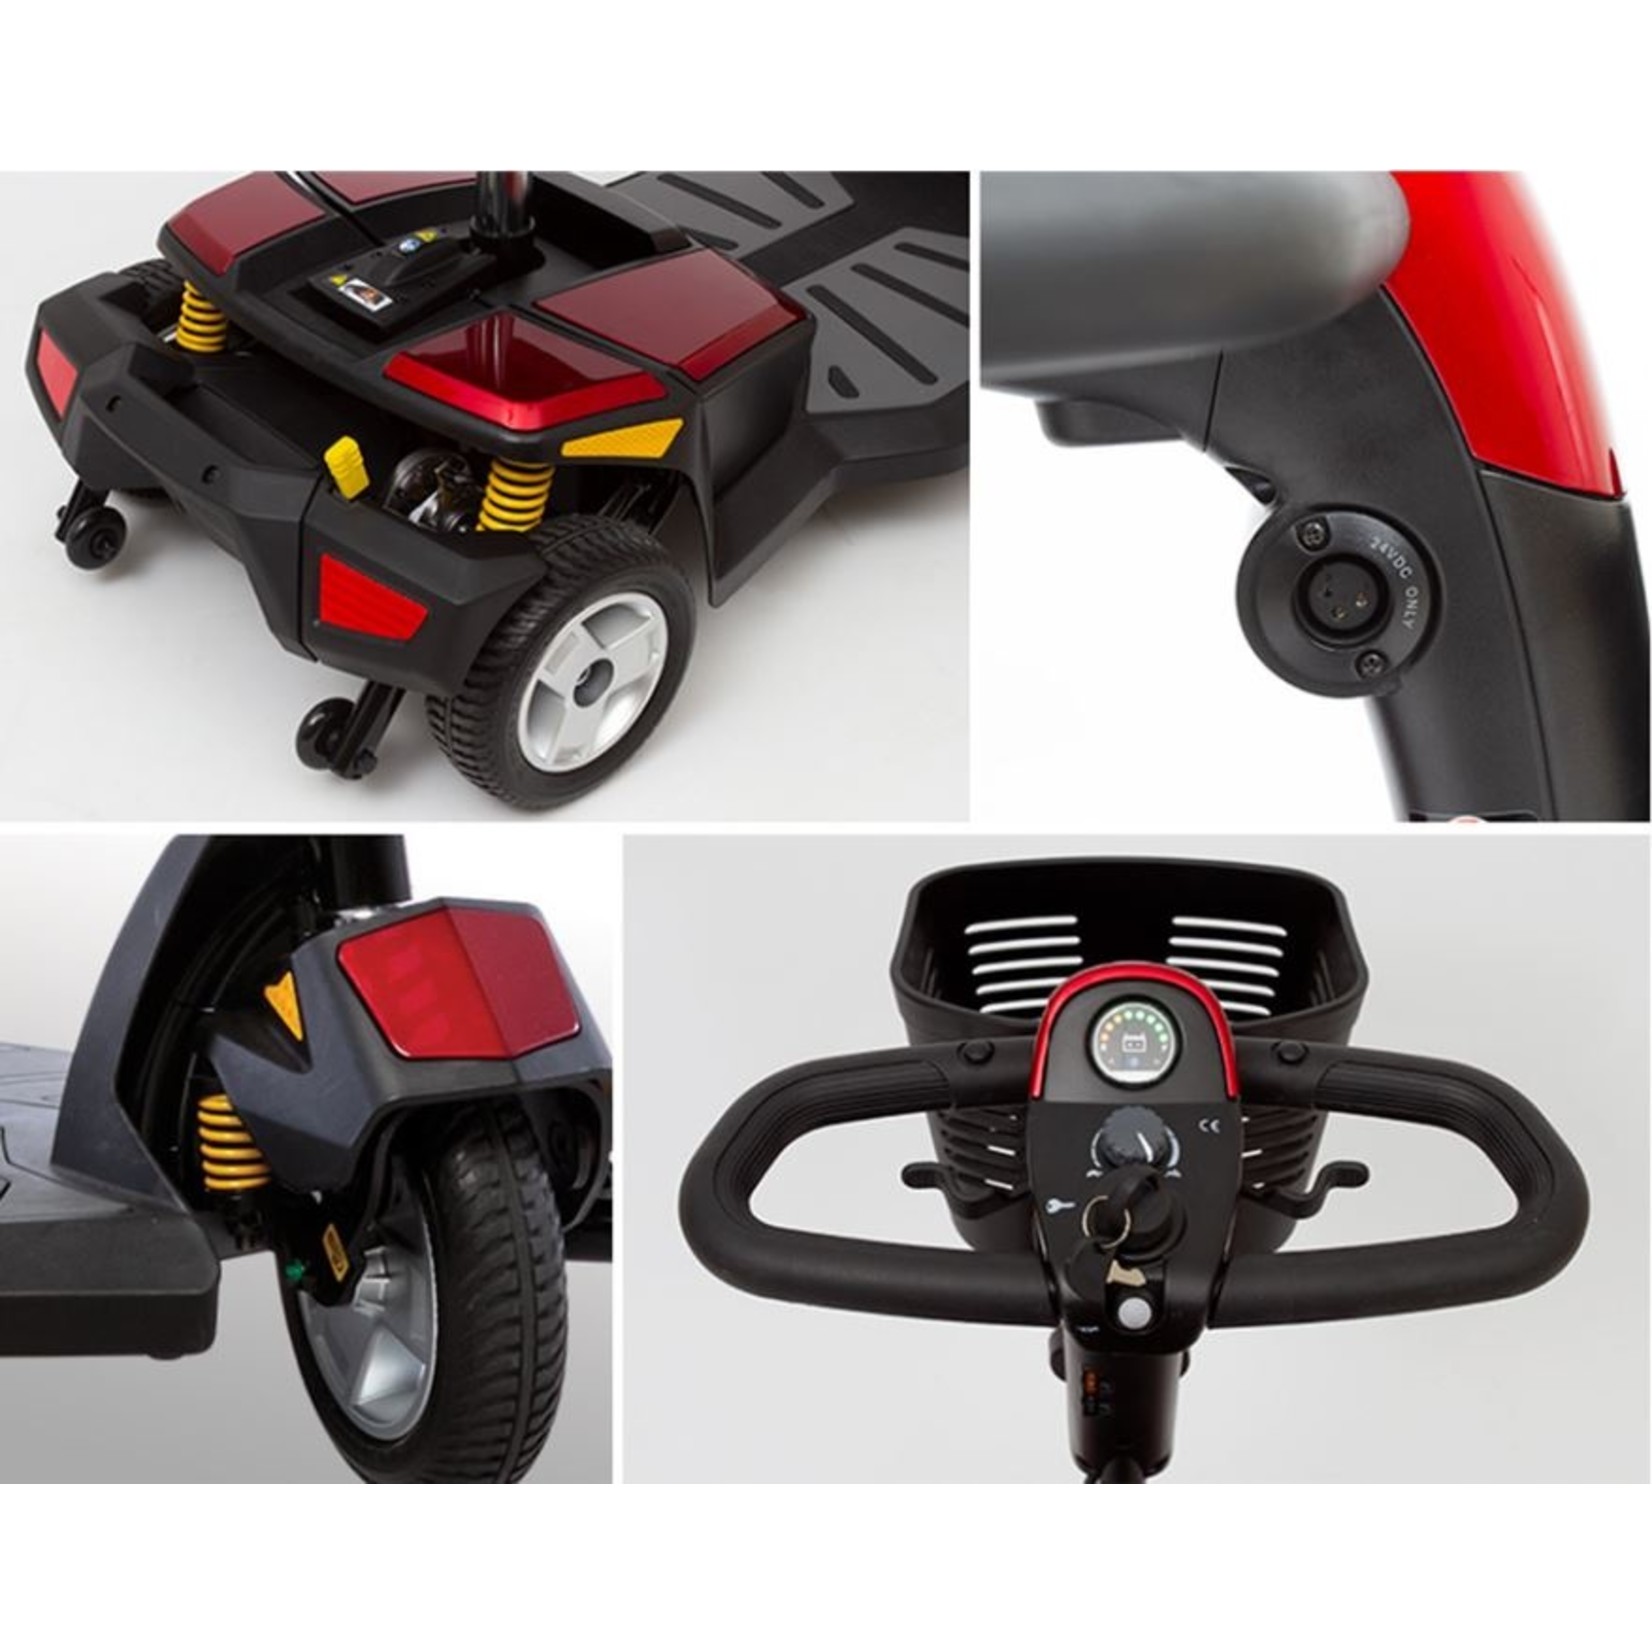 Pride Go-Go LX with CTS Suspension 3-Wheel Scooters 12AH Battery